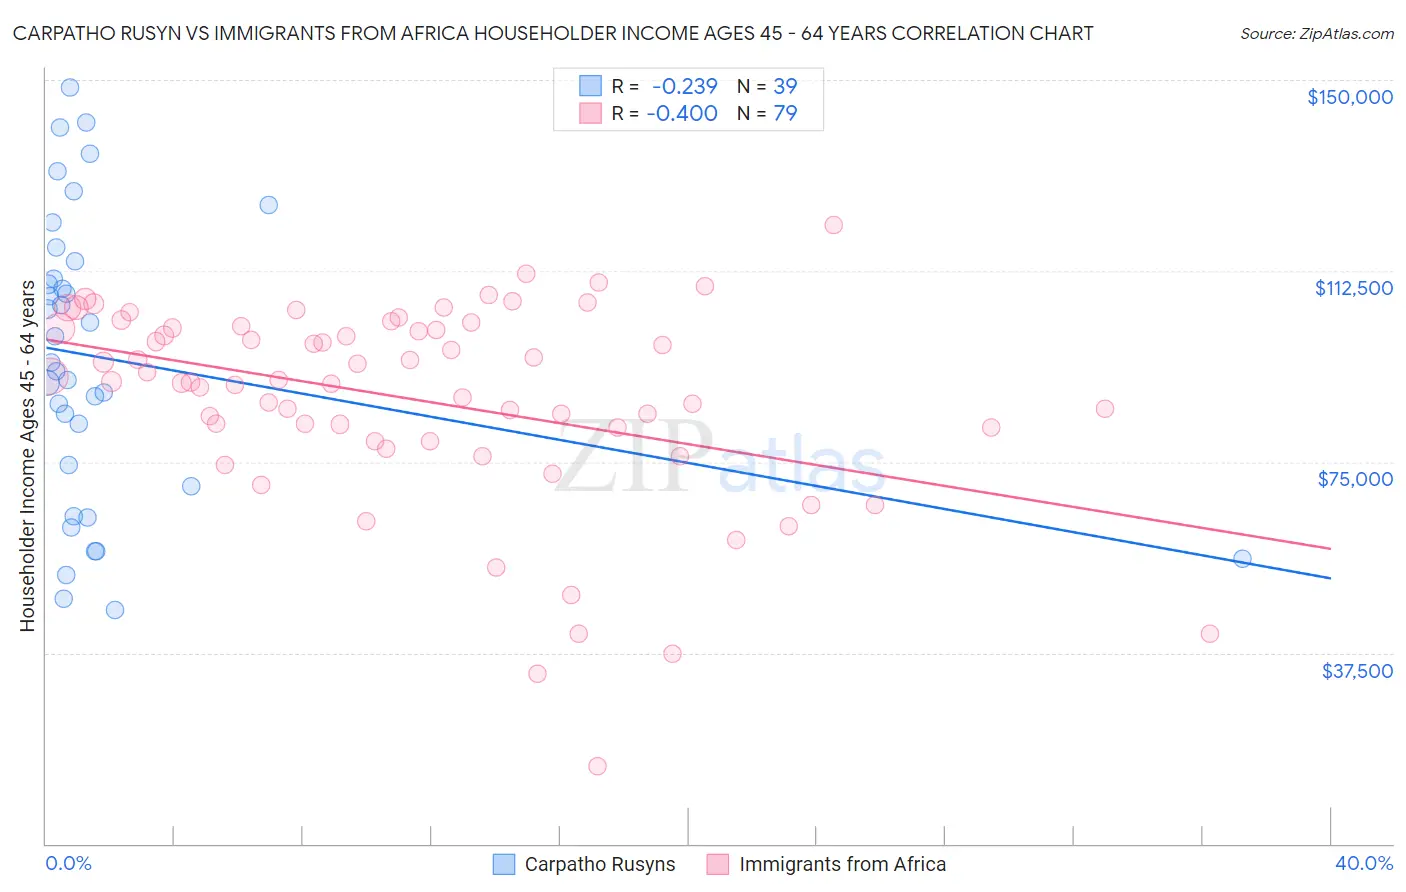 Carpatho Rusyn vs Immigrants from Africa Householder Income Ages 45 - 64 years